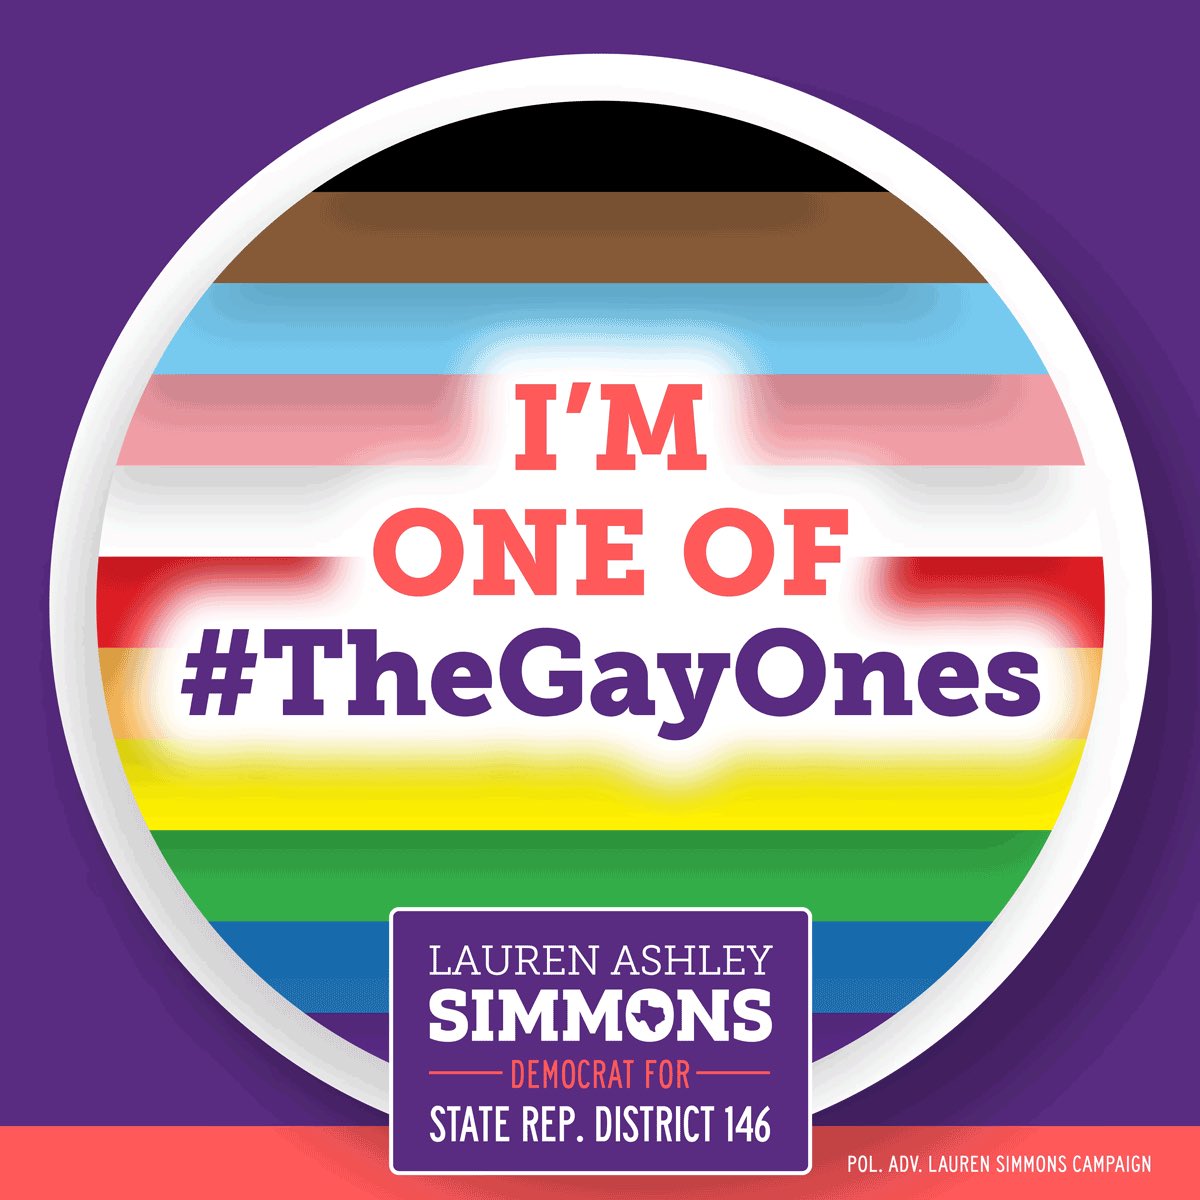 @_RebeccaMarques @LASimmonsTX146 Oh for sure gotta be among #thegayones